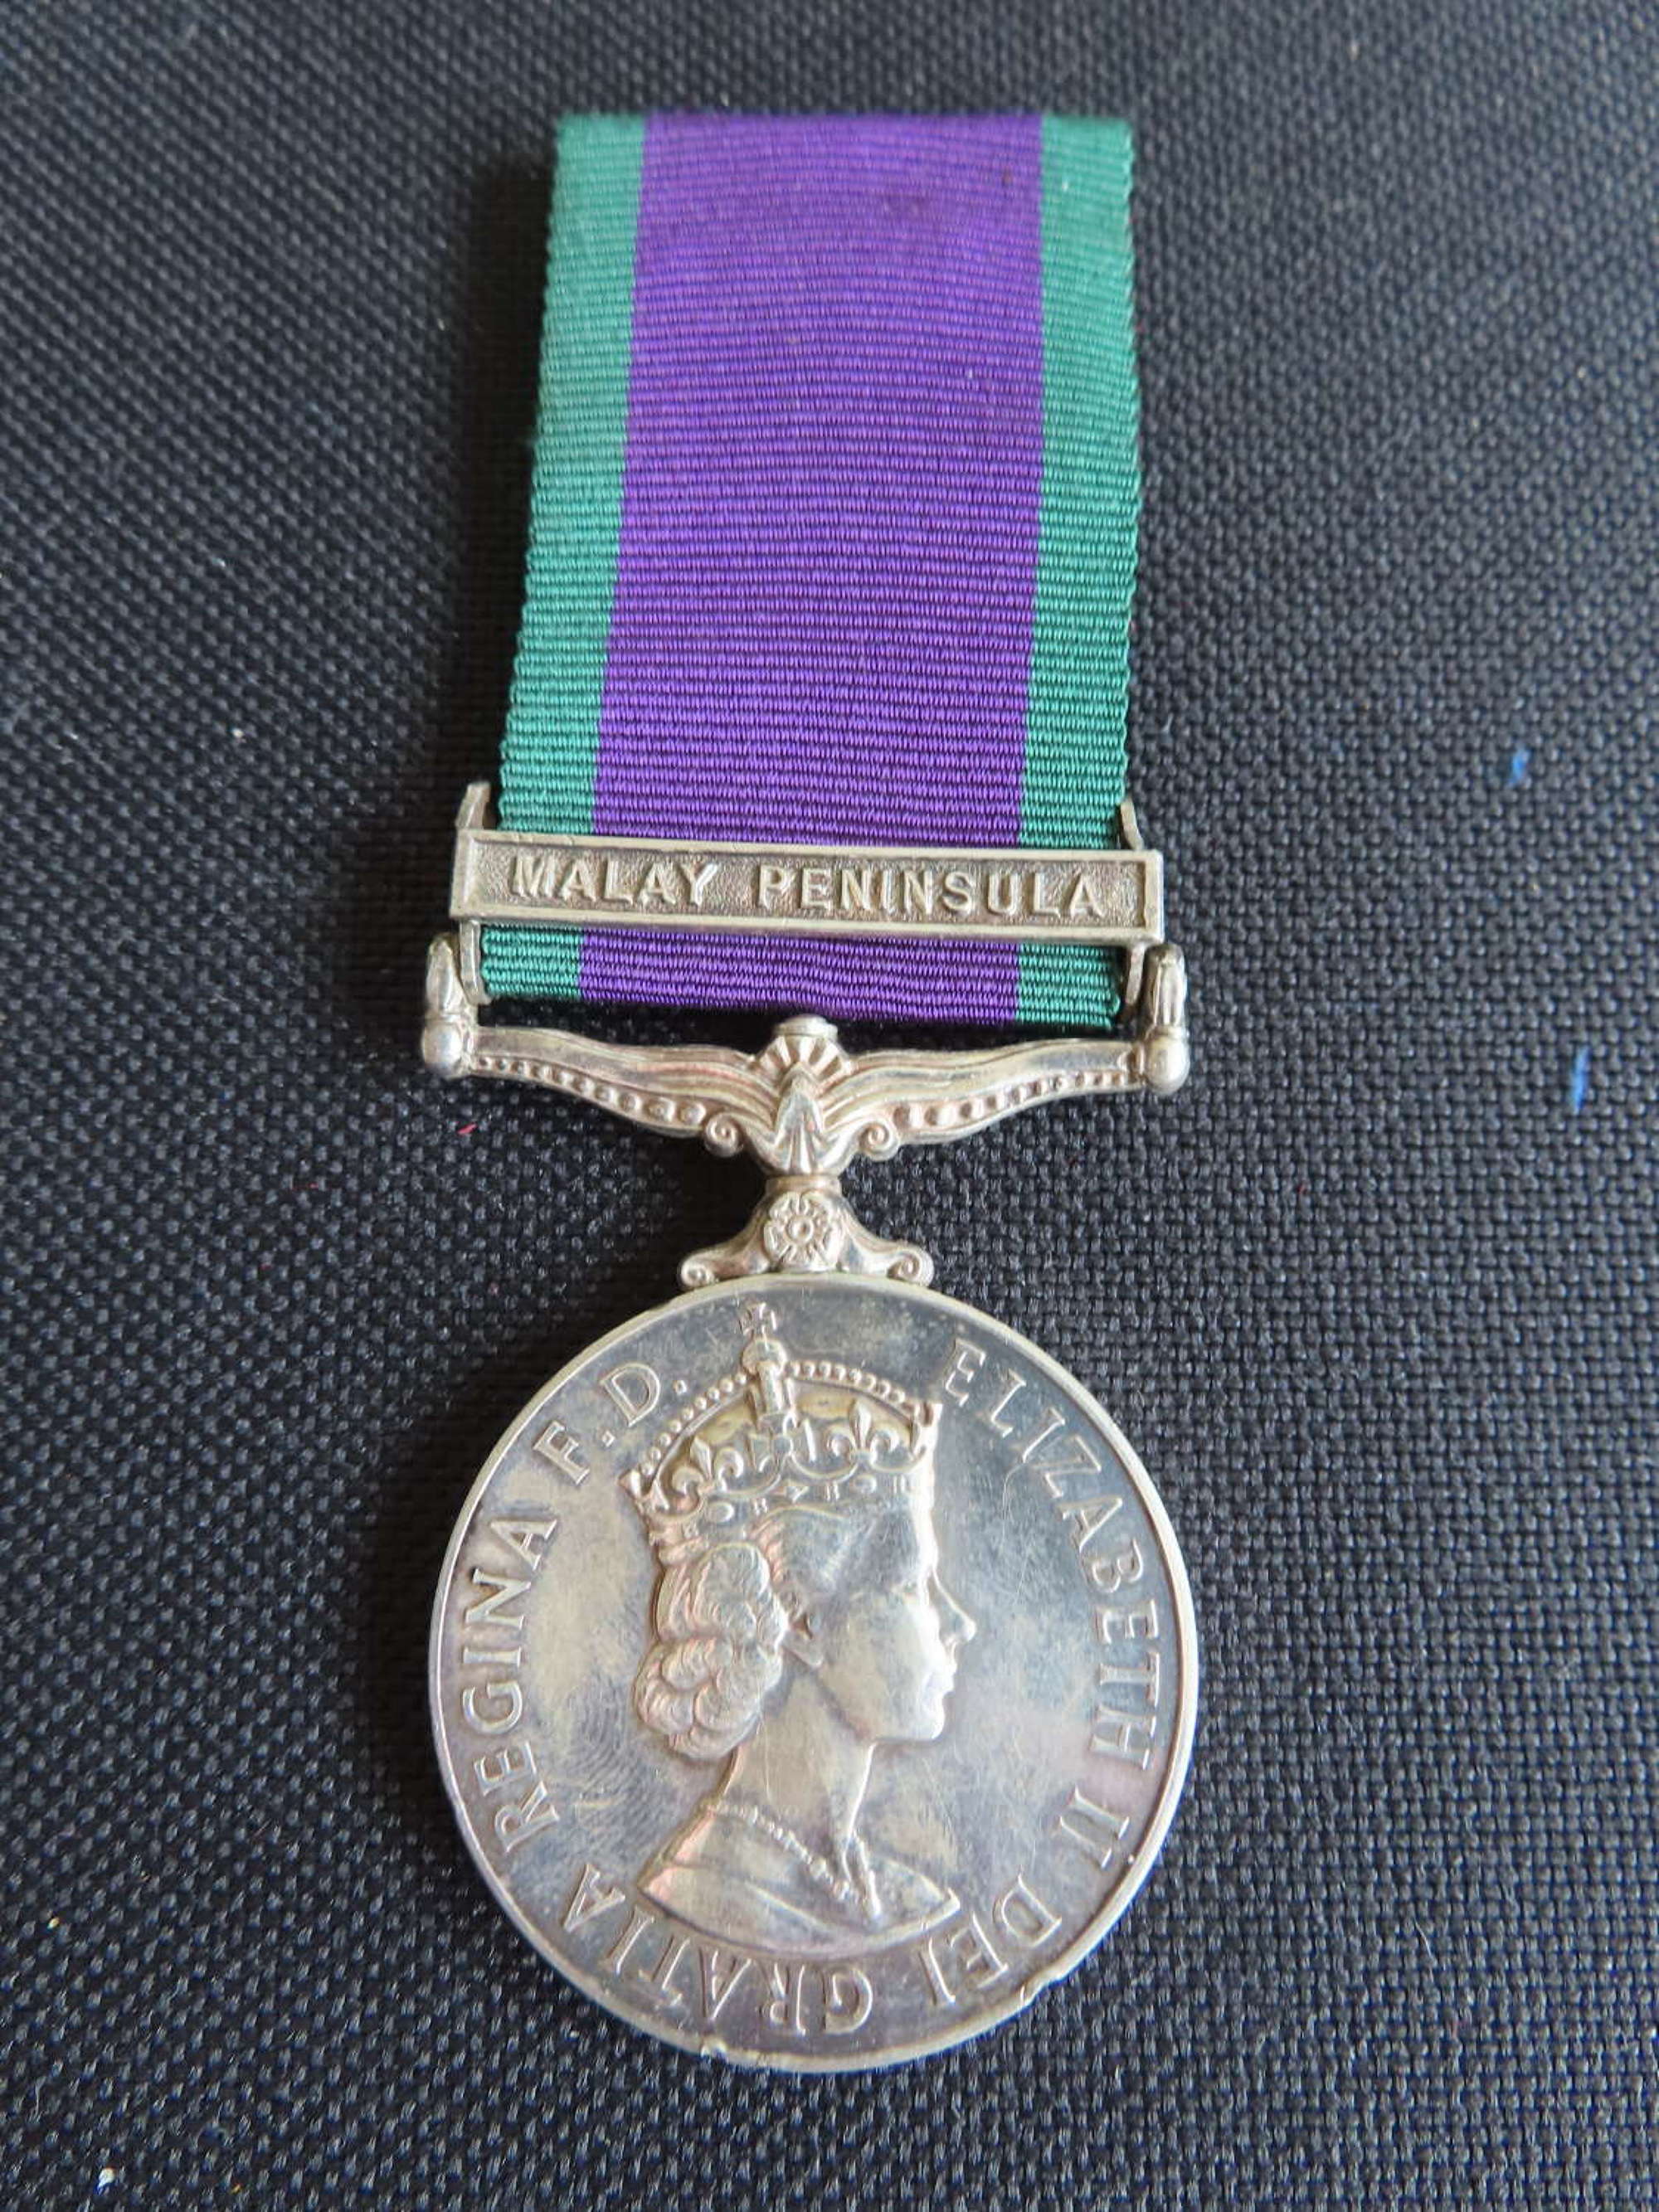 Malay Peninsula campaign service medal awarded to Sgt McNeil RAPC